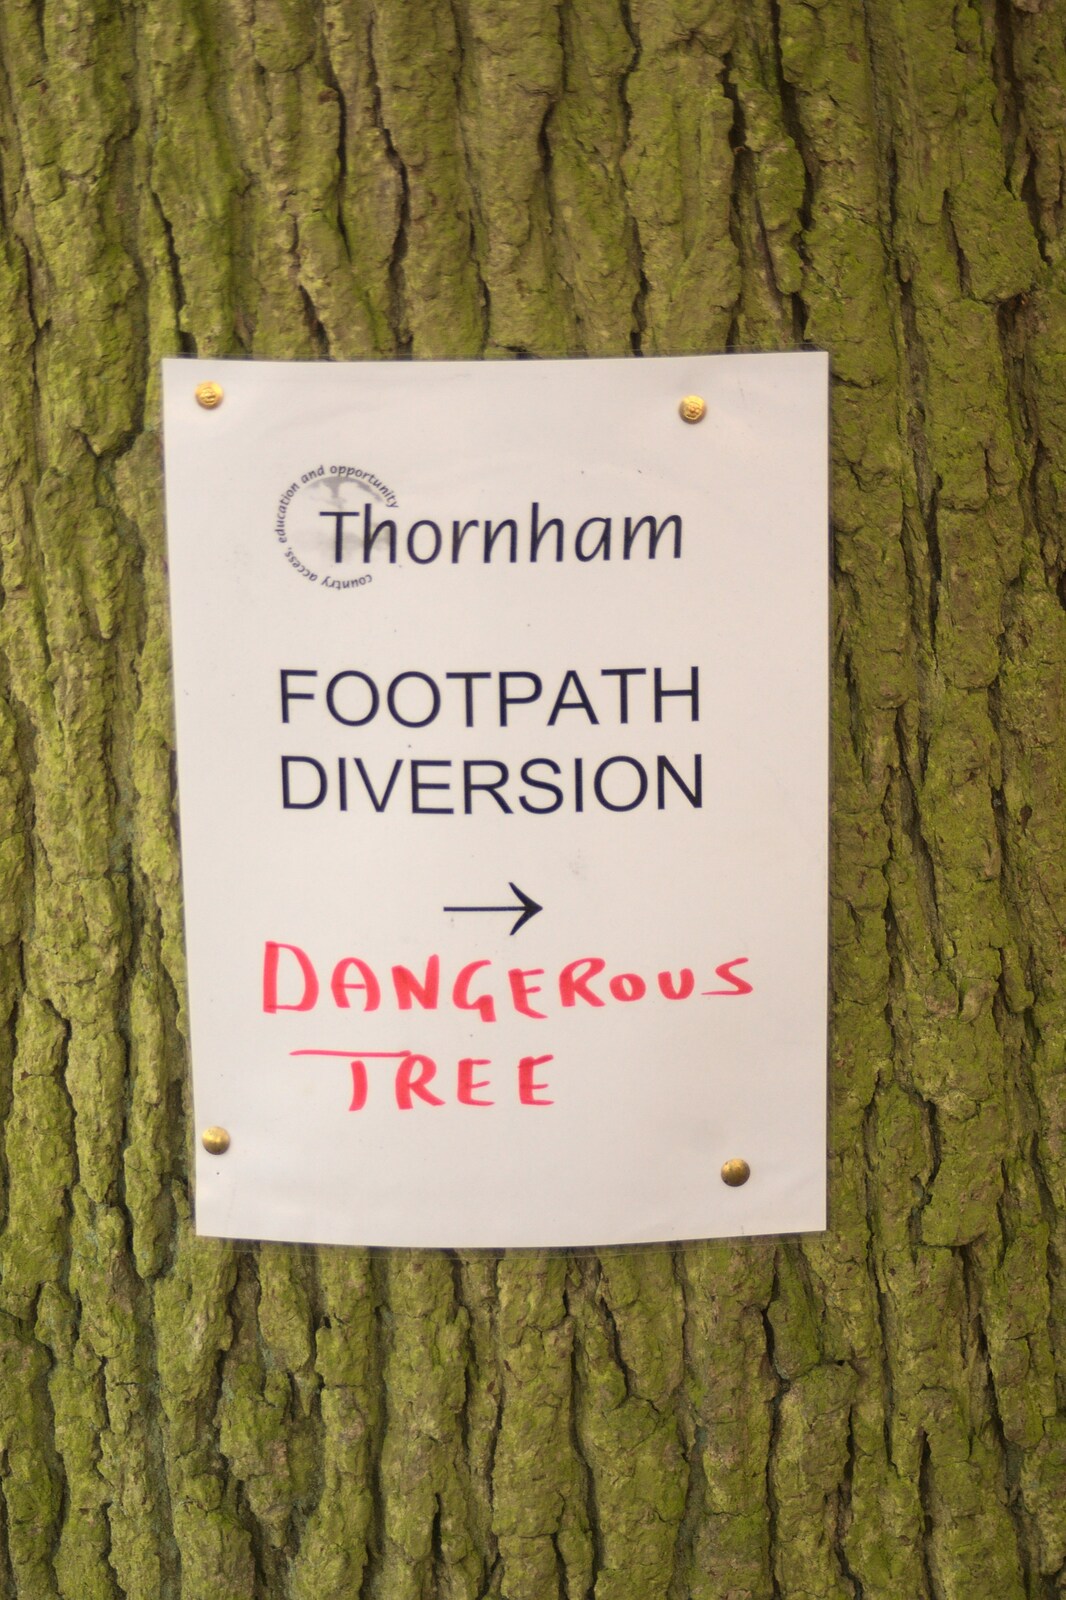 The footath is diverted by a 'dangerous tree' from The NCT Sale and a Walk in the Woods, Bressingham and Thornham, Norfolk and Suffolk - 27th November 2011